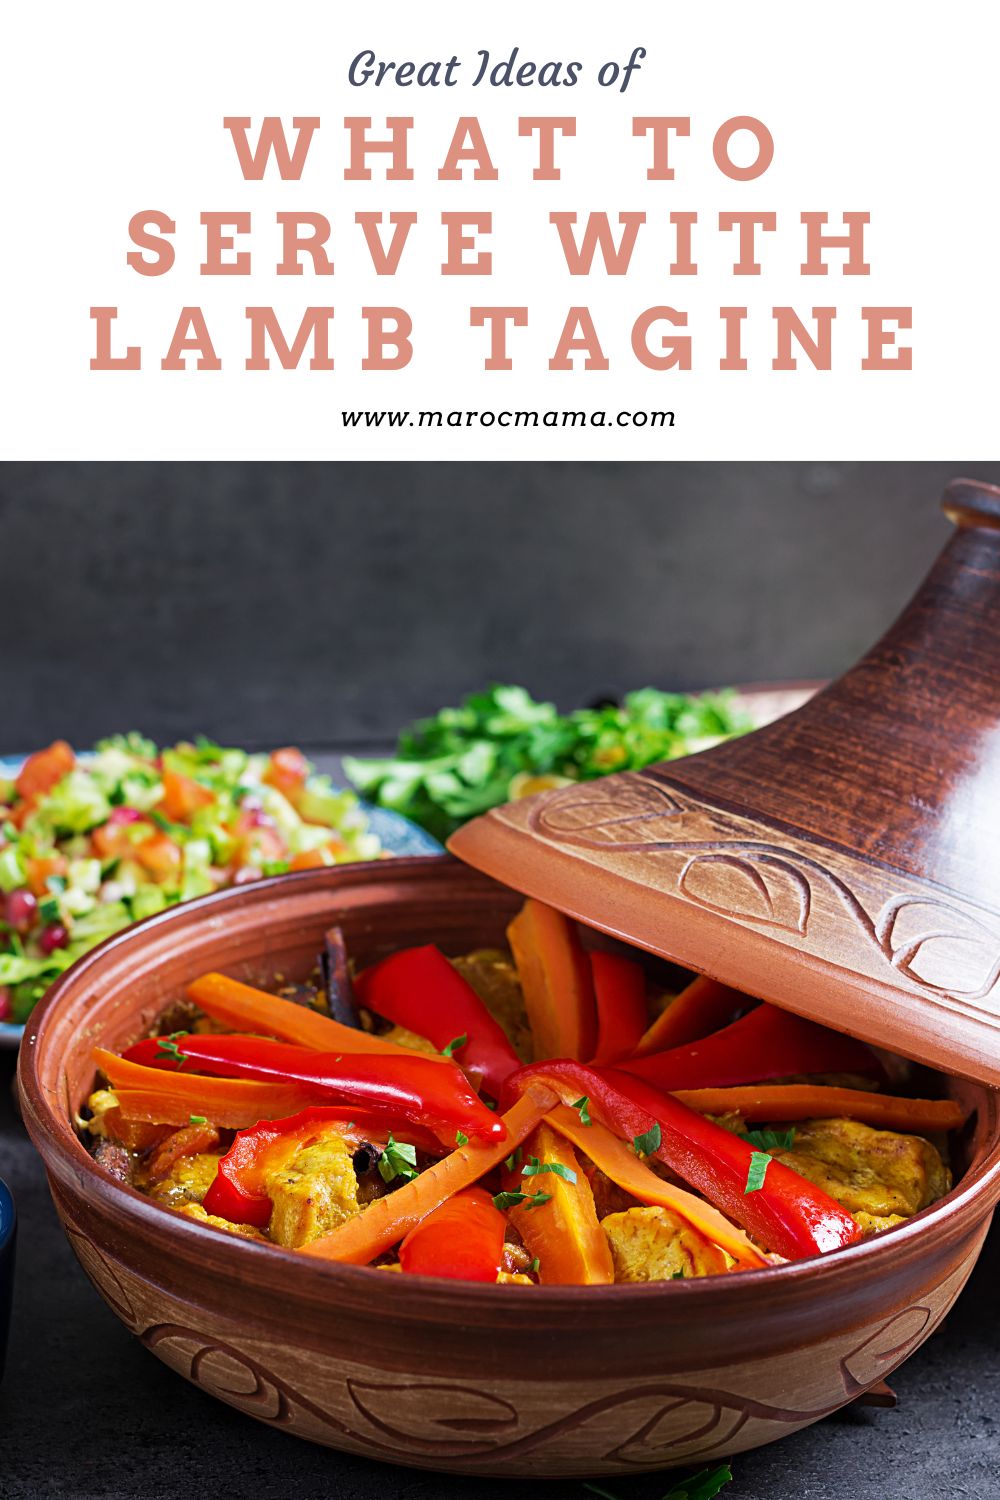 Traditional Moroccan tagine dishes with the text Great Ideas of What to Serve with Lamb Tagine